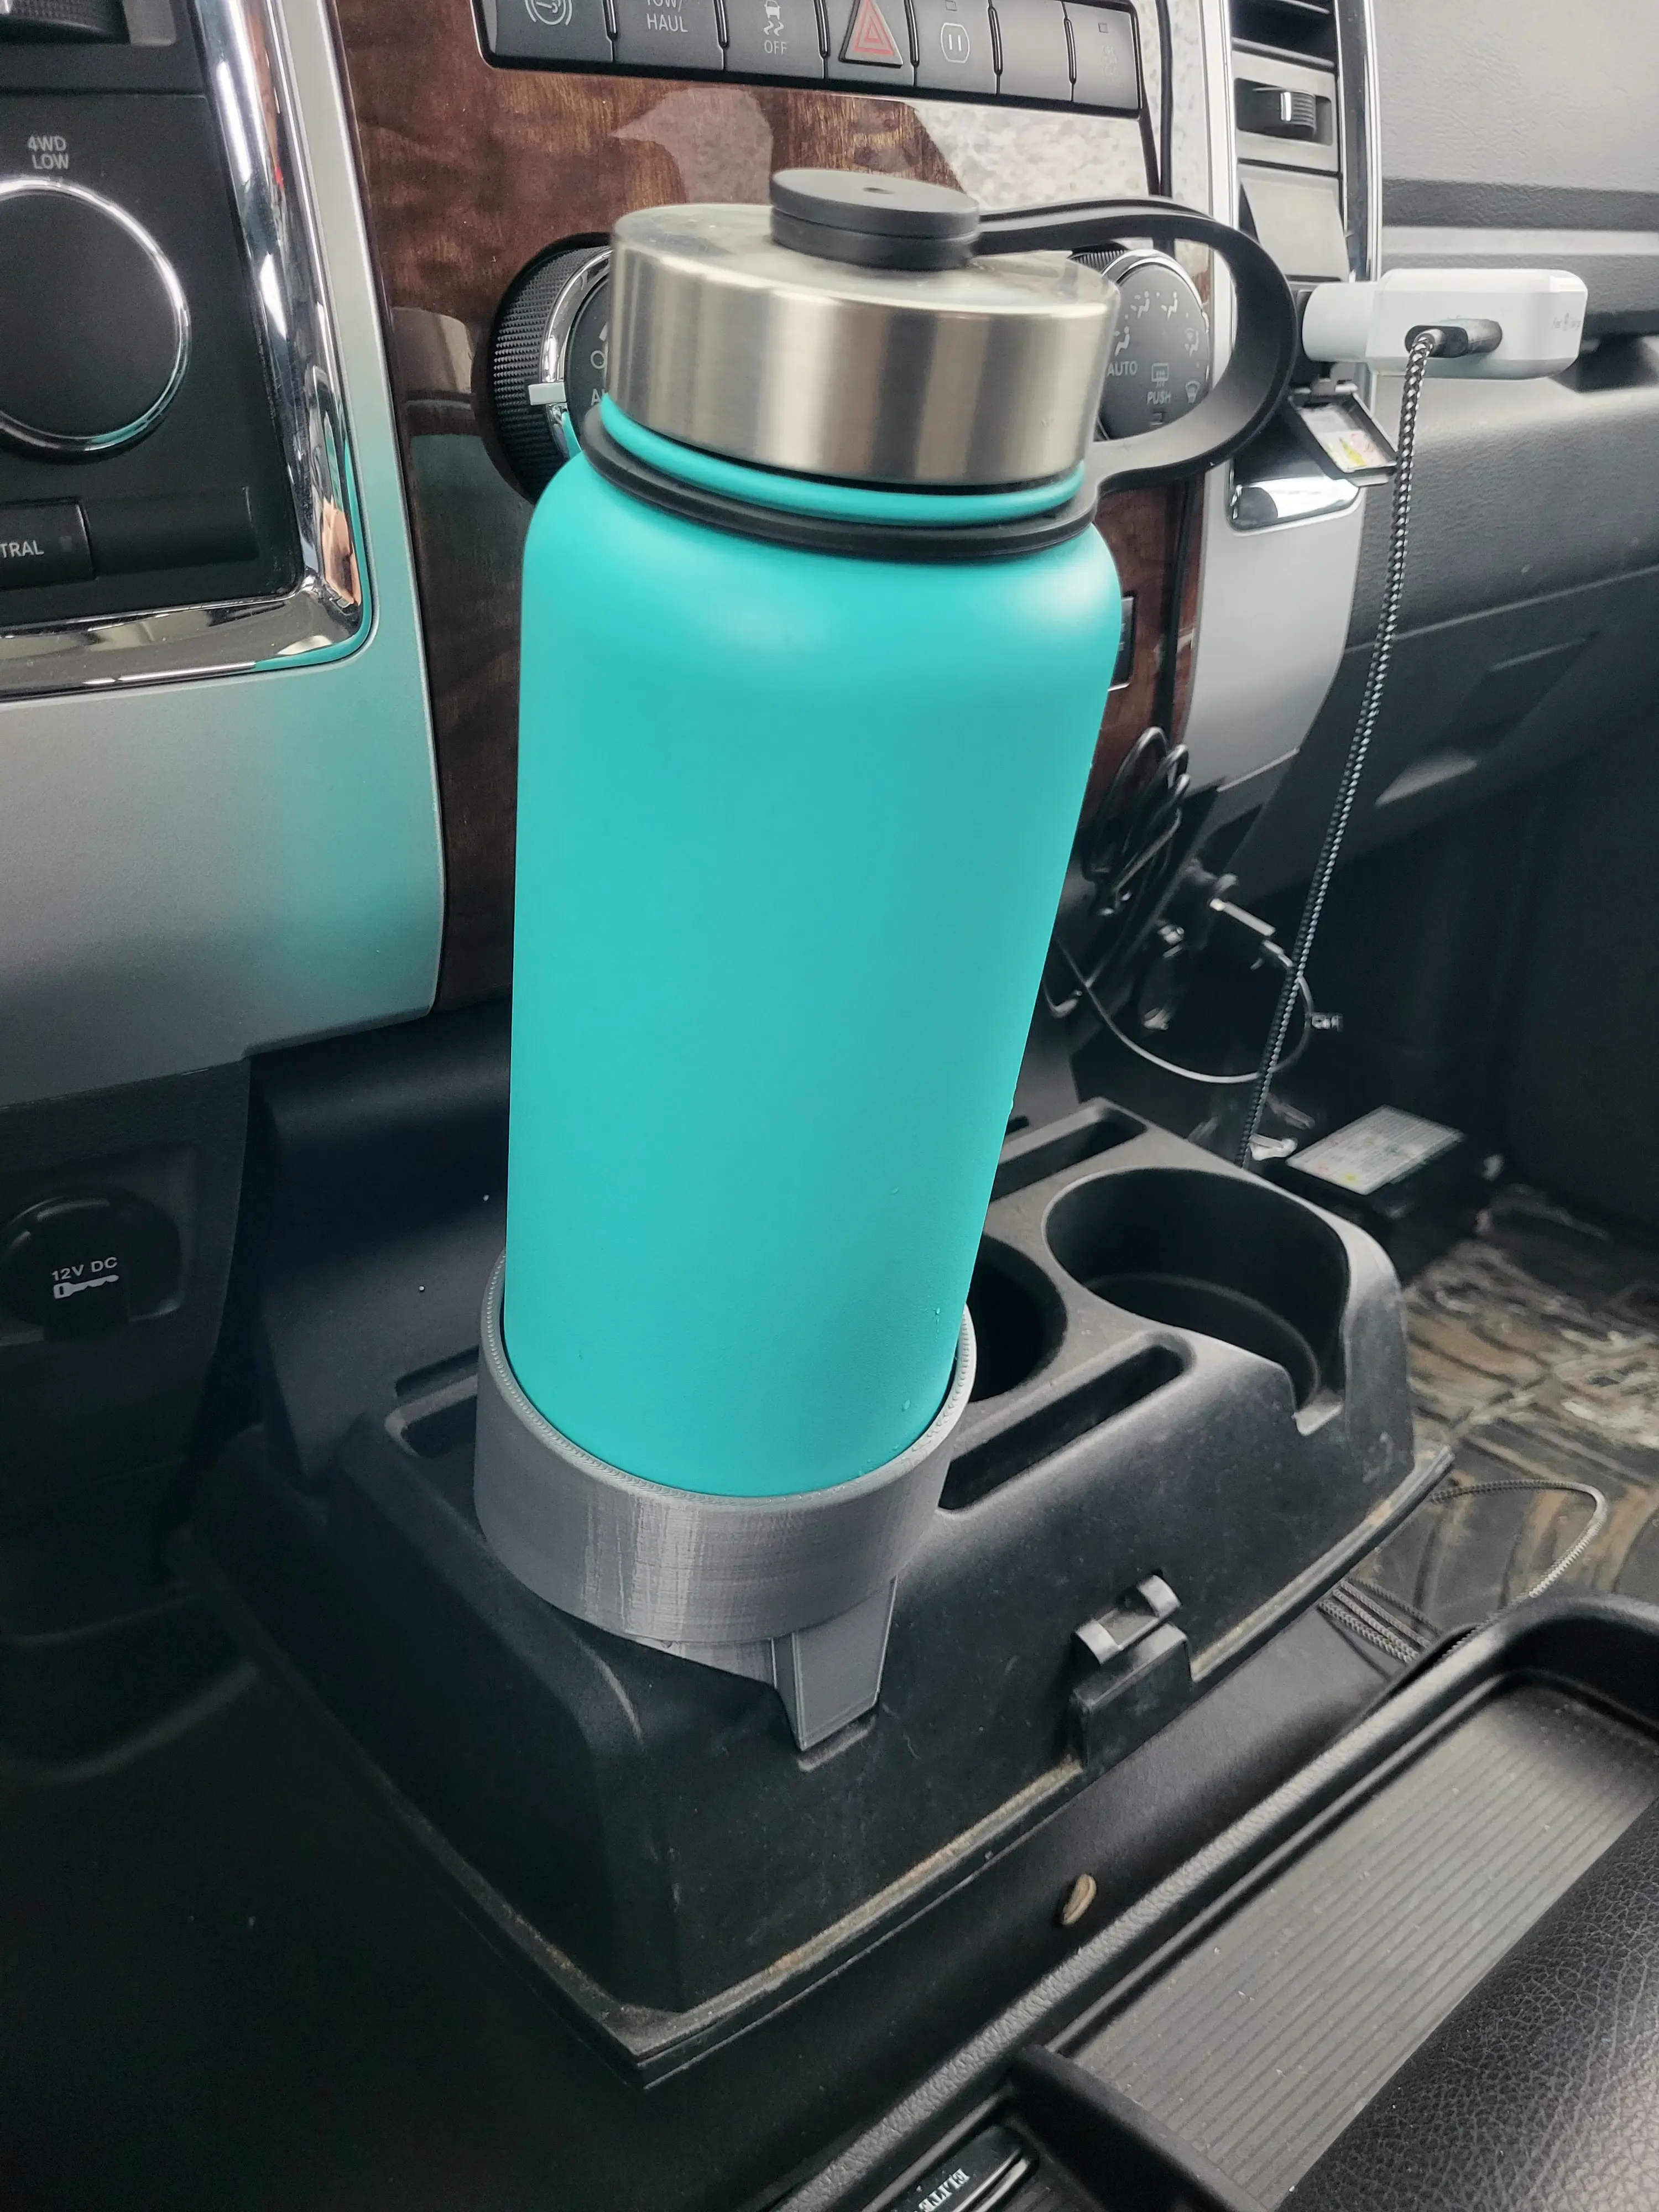 Thermoflask Cup holder